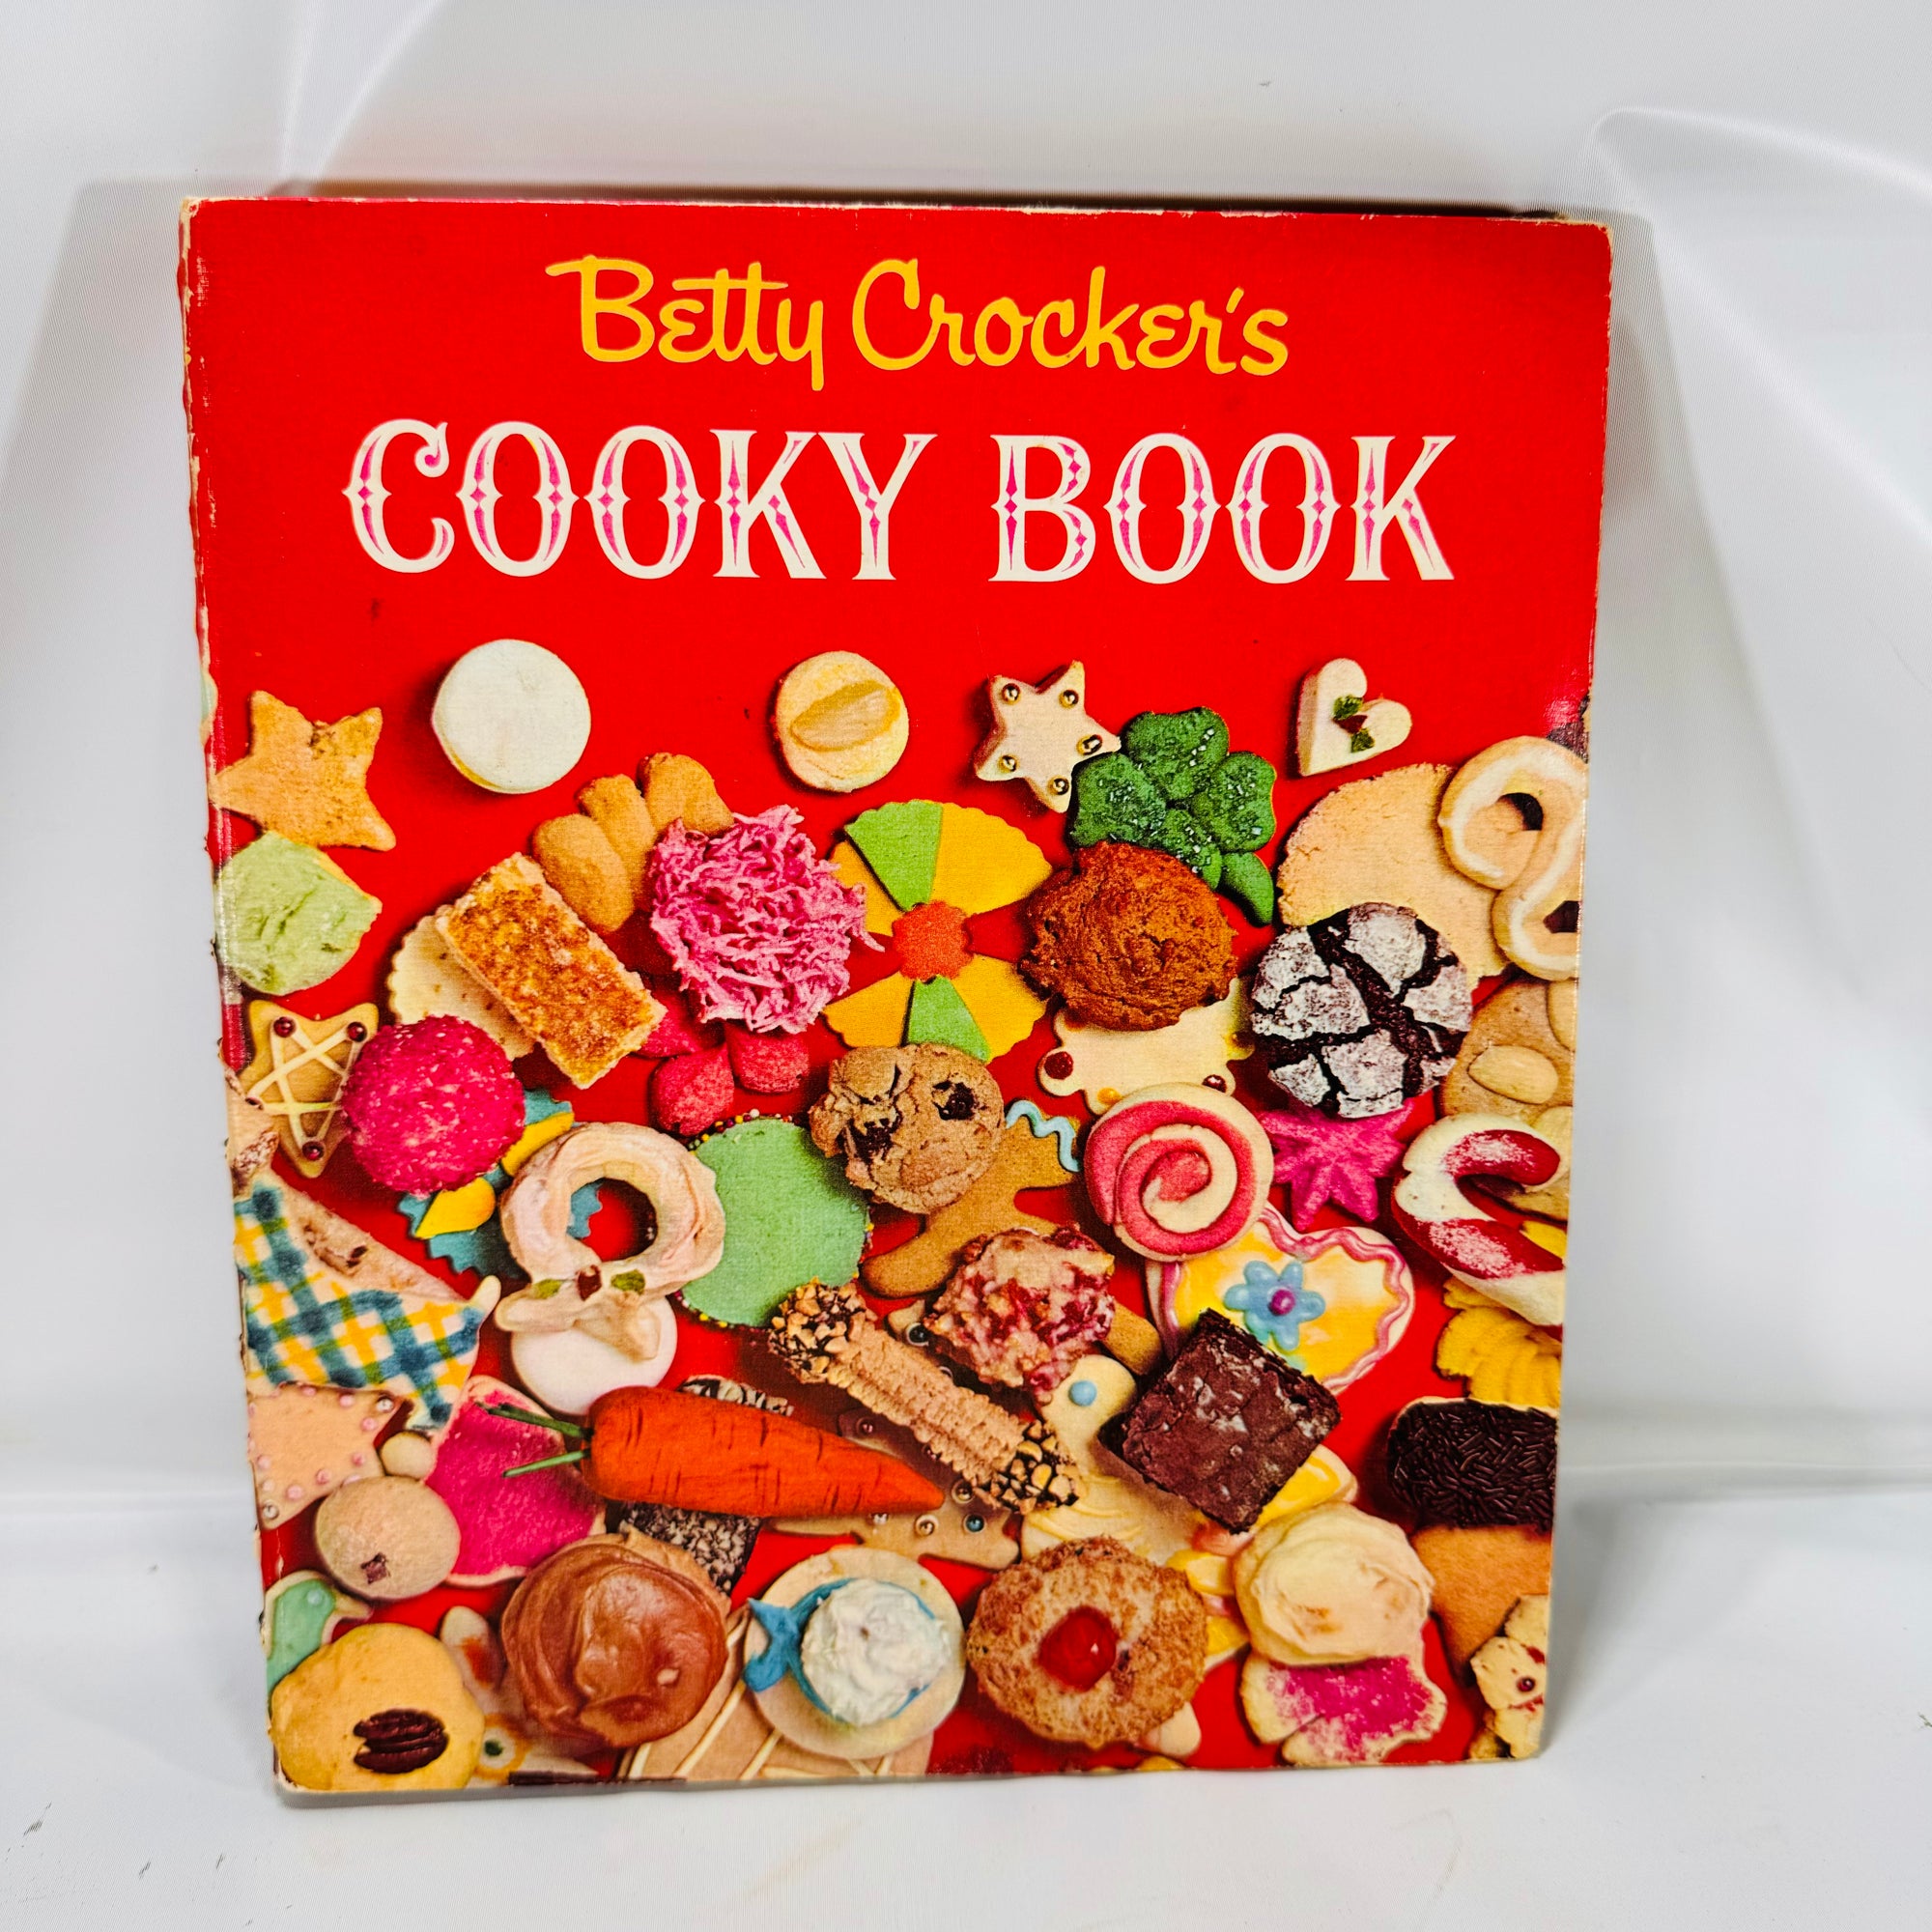 Betty Crocker's Cooky Book illustrations by Eric Mulvany 196General Mills Inc